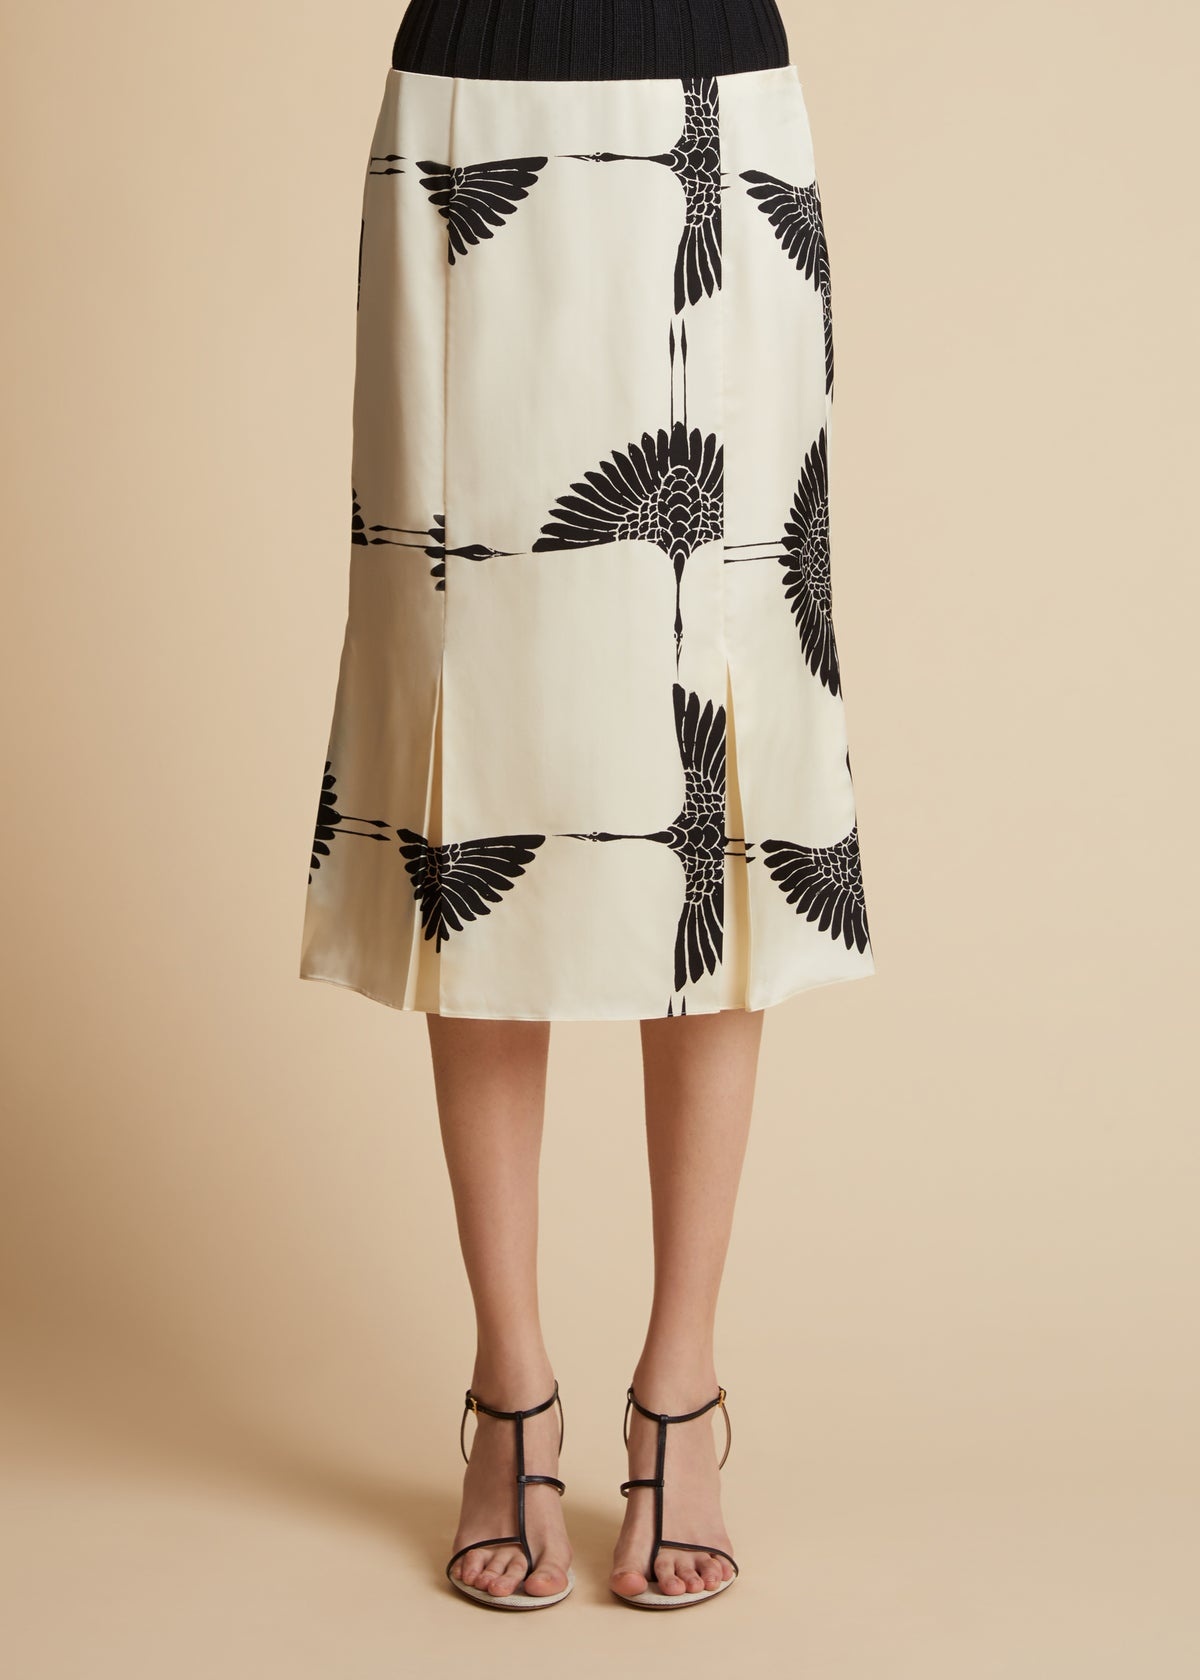 The Levy Skirt in Cream and Black Crane Print - 1